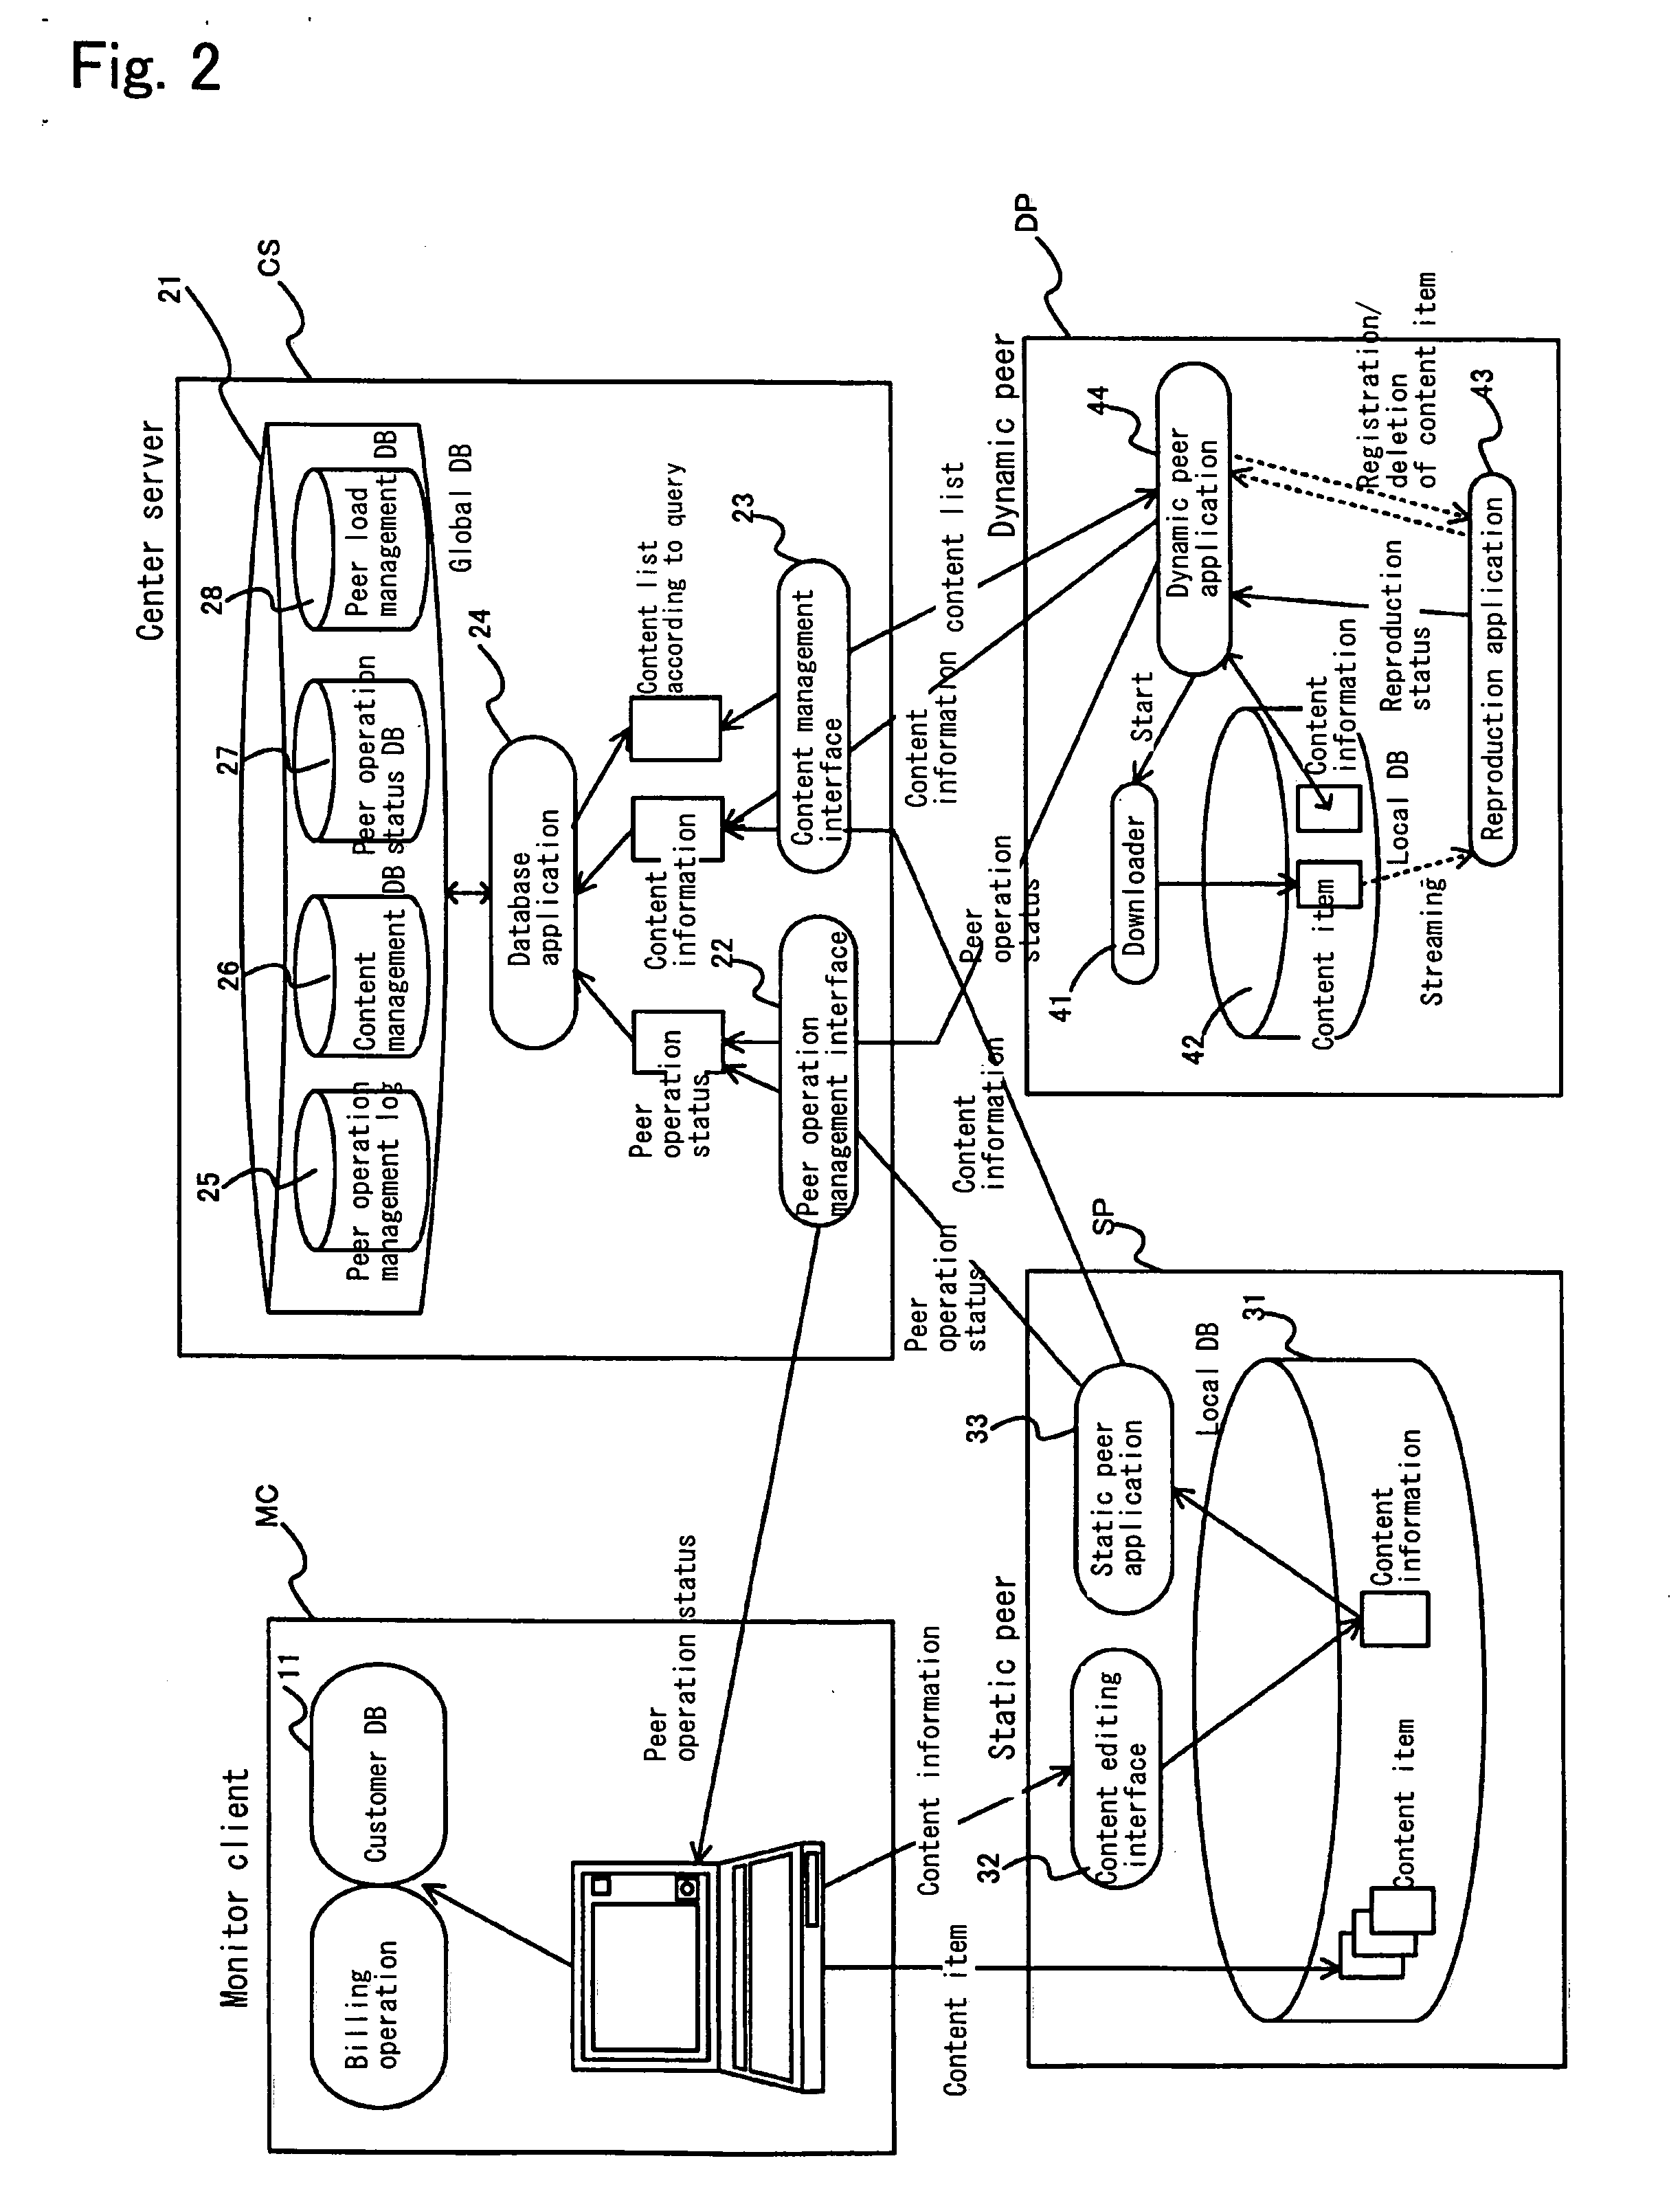 Peer-to-peer-type content distribution system